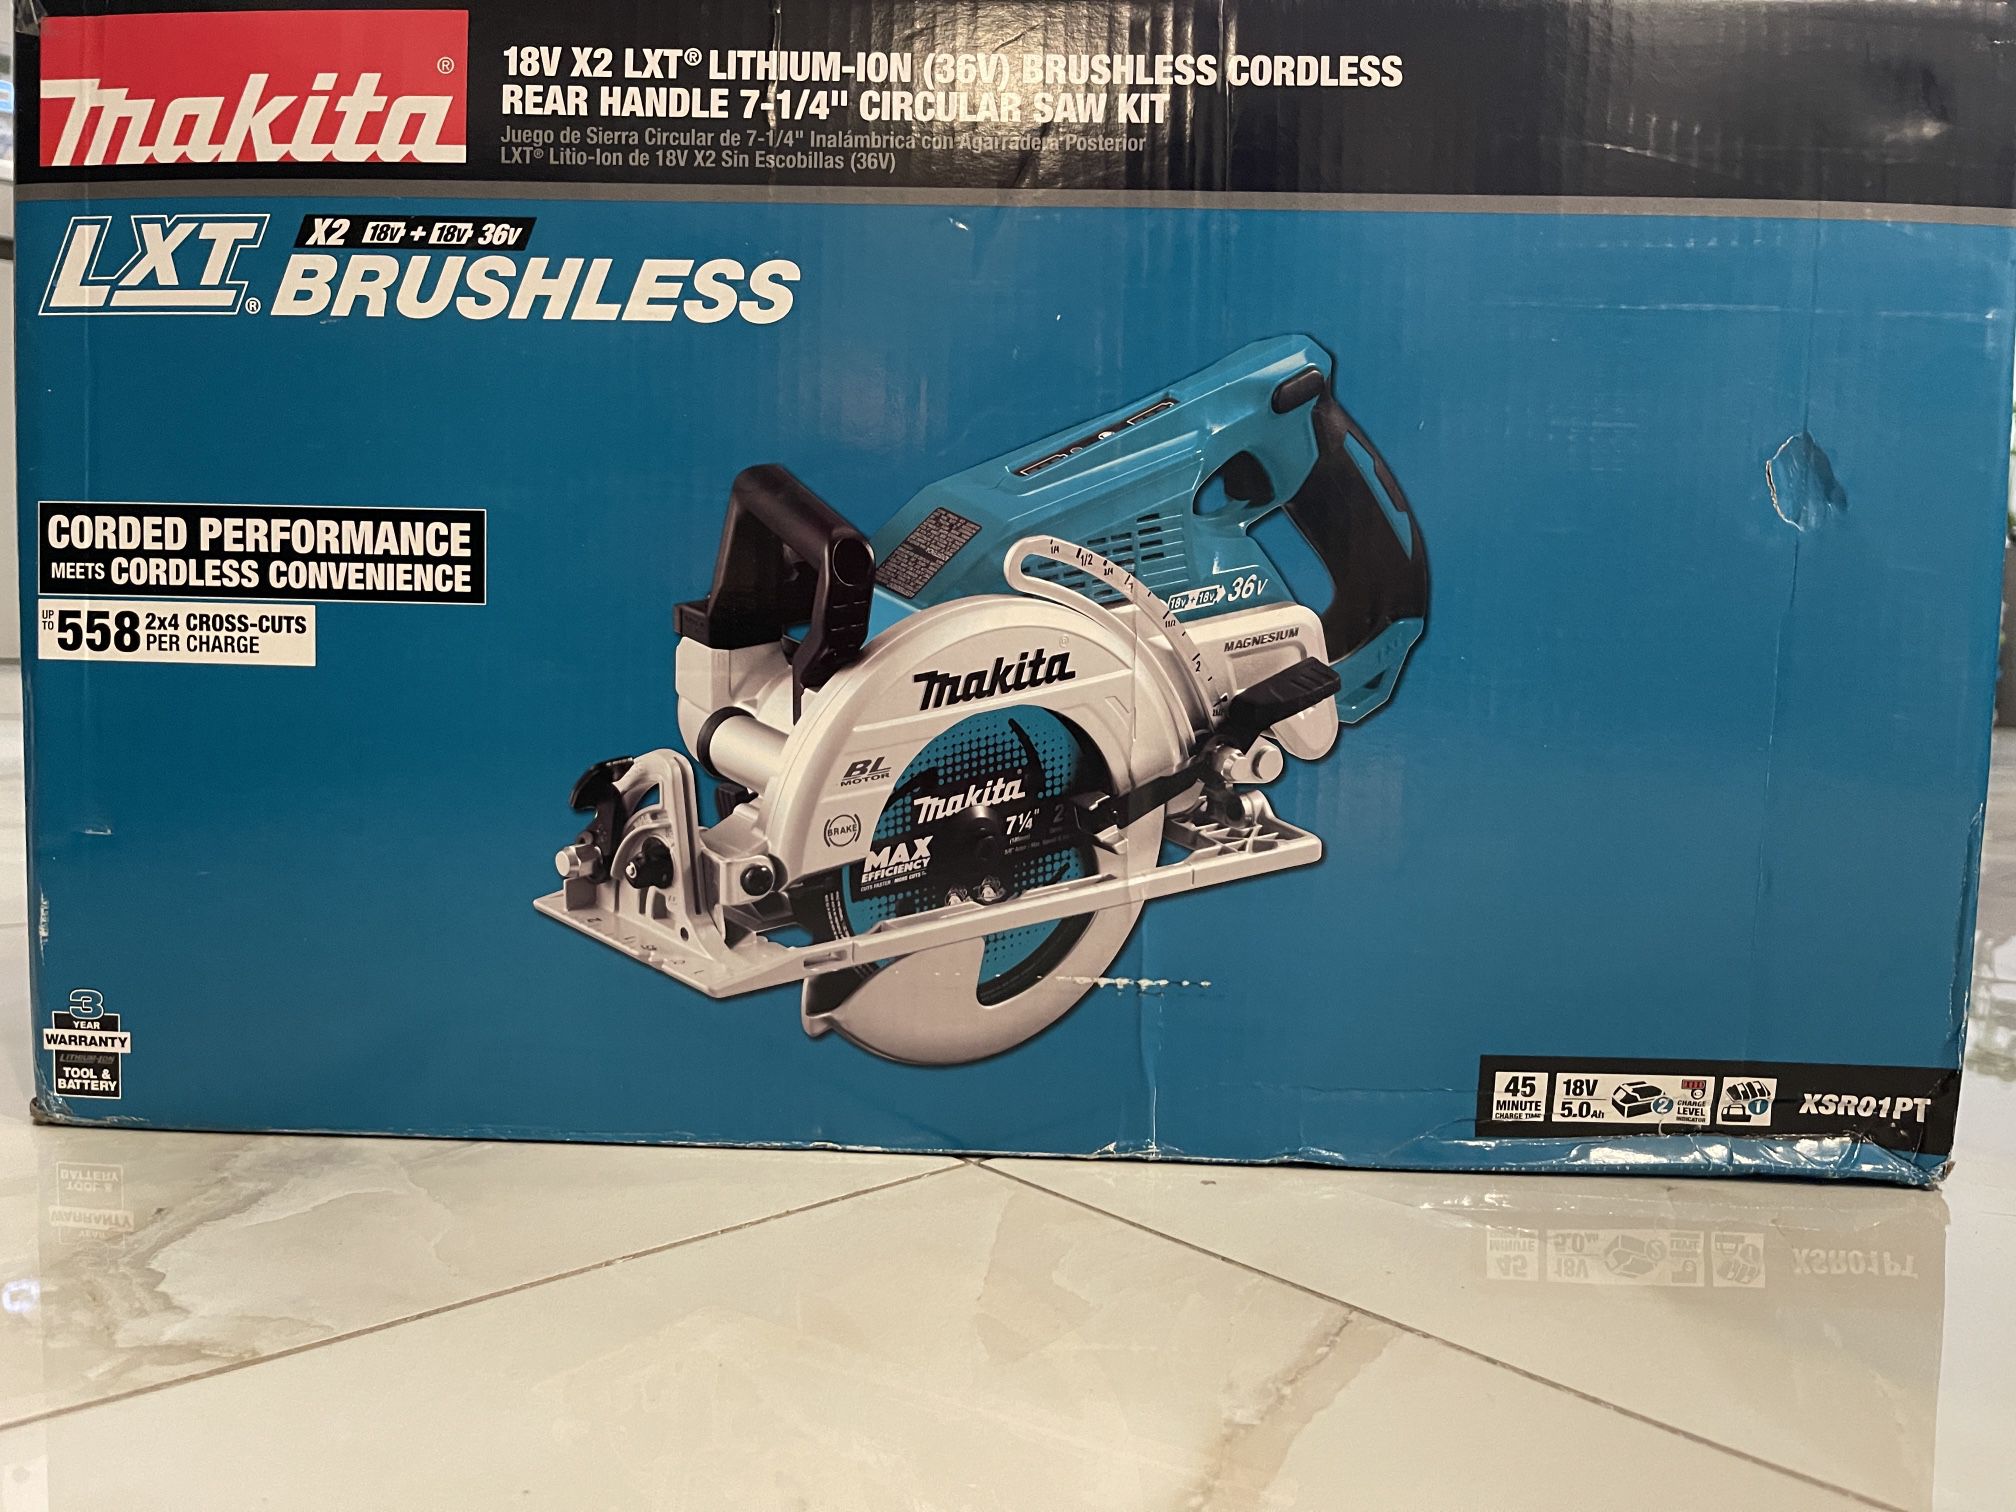 Makita 18V X2 LXT 5.0Ah Lithium-Ion (36V) Brushless Cordless Rear Handle 7-1 /4 in. Circular Saw Kit for Sale in Queens, NY OfferUp